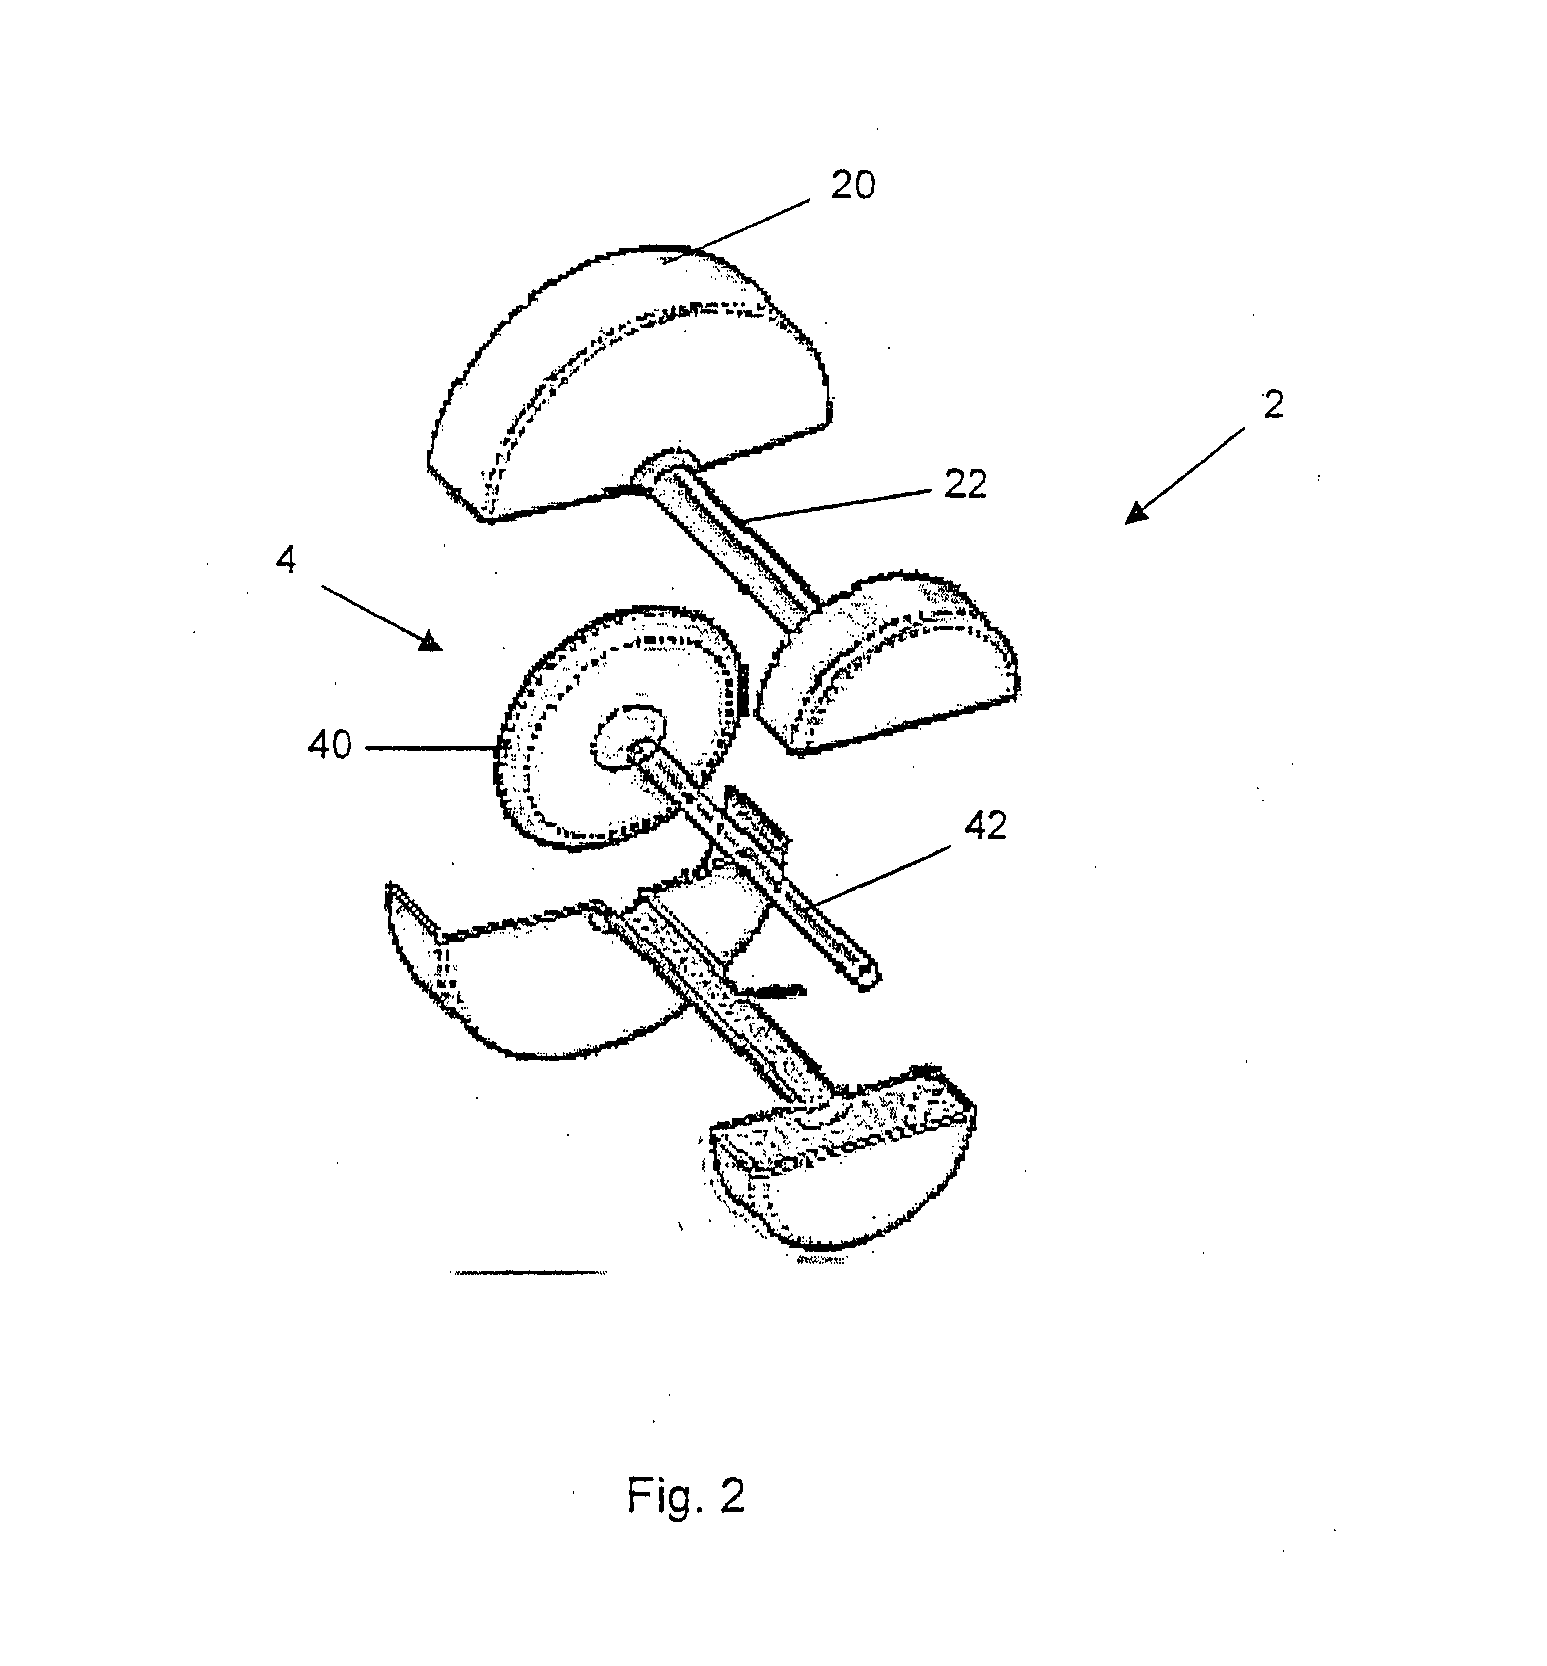 Placental blood extraction device